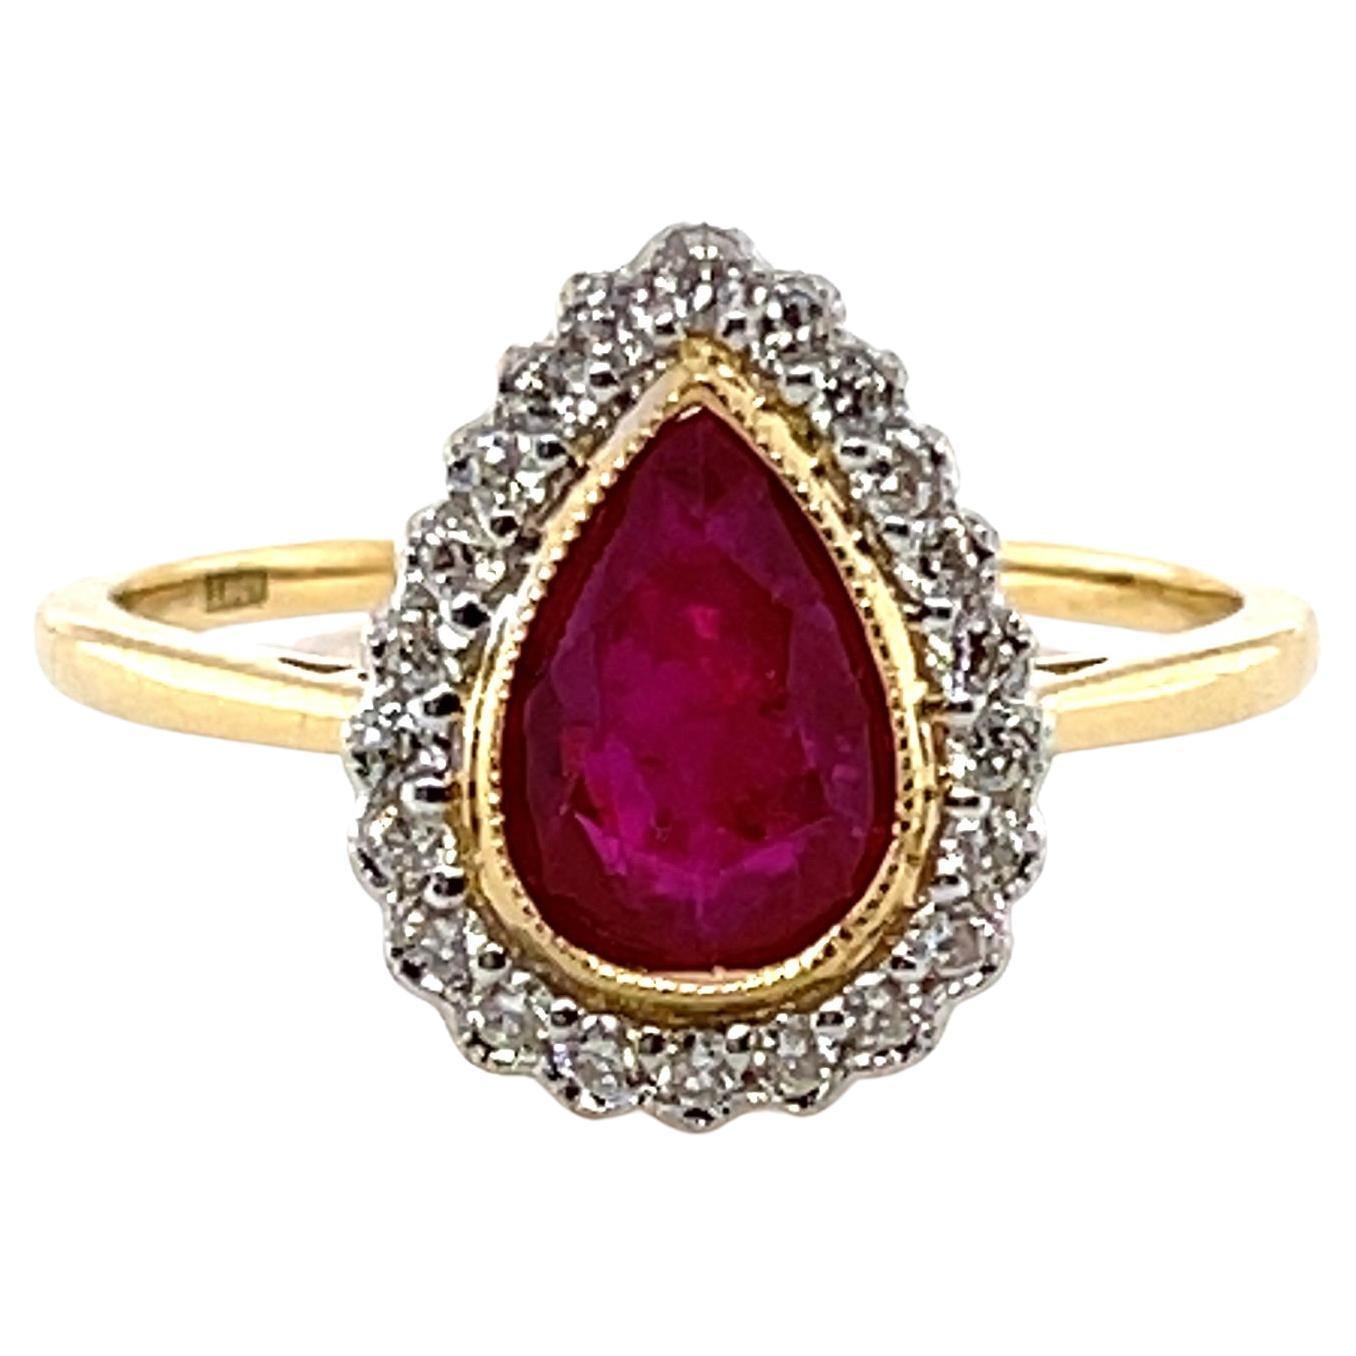 For Sale:  18ct Yellow Gold Ring with 'No Heat' 1.43ct Ruby and Diamond